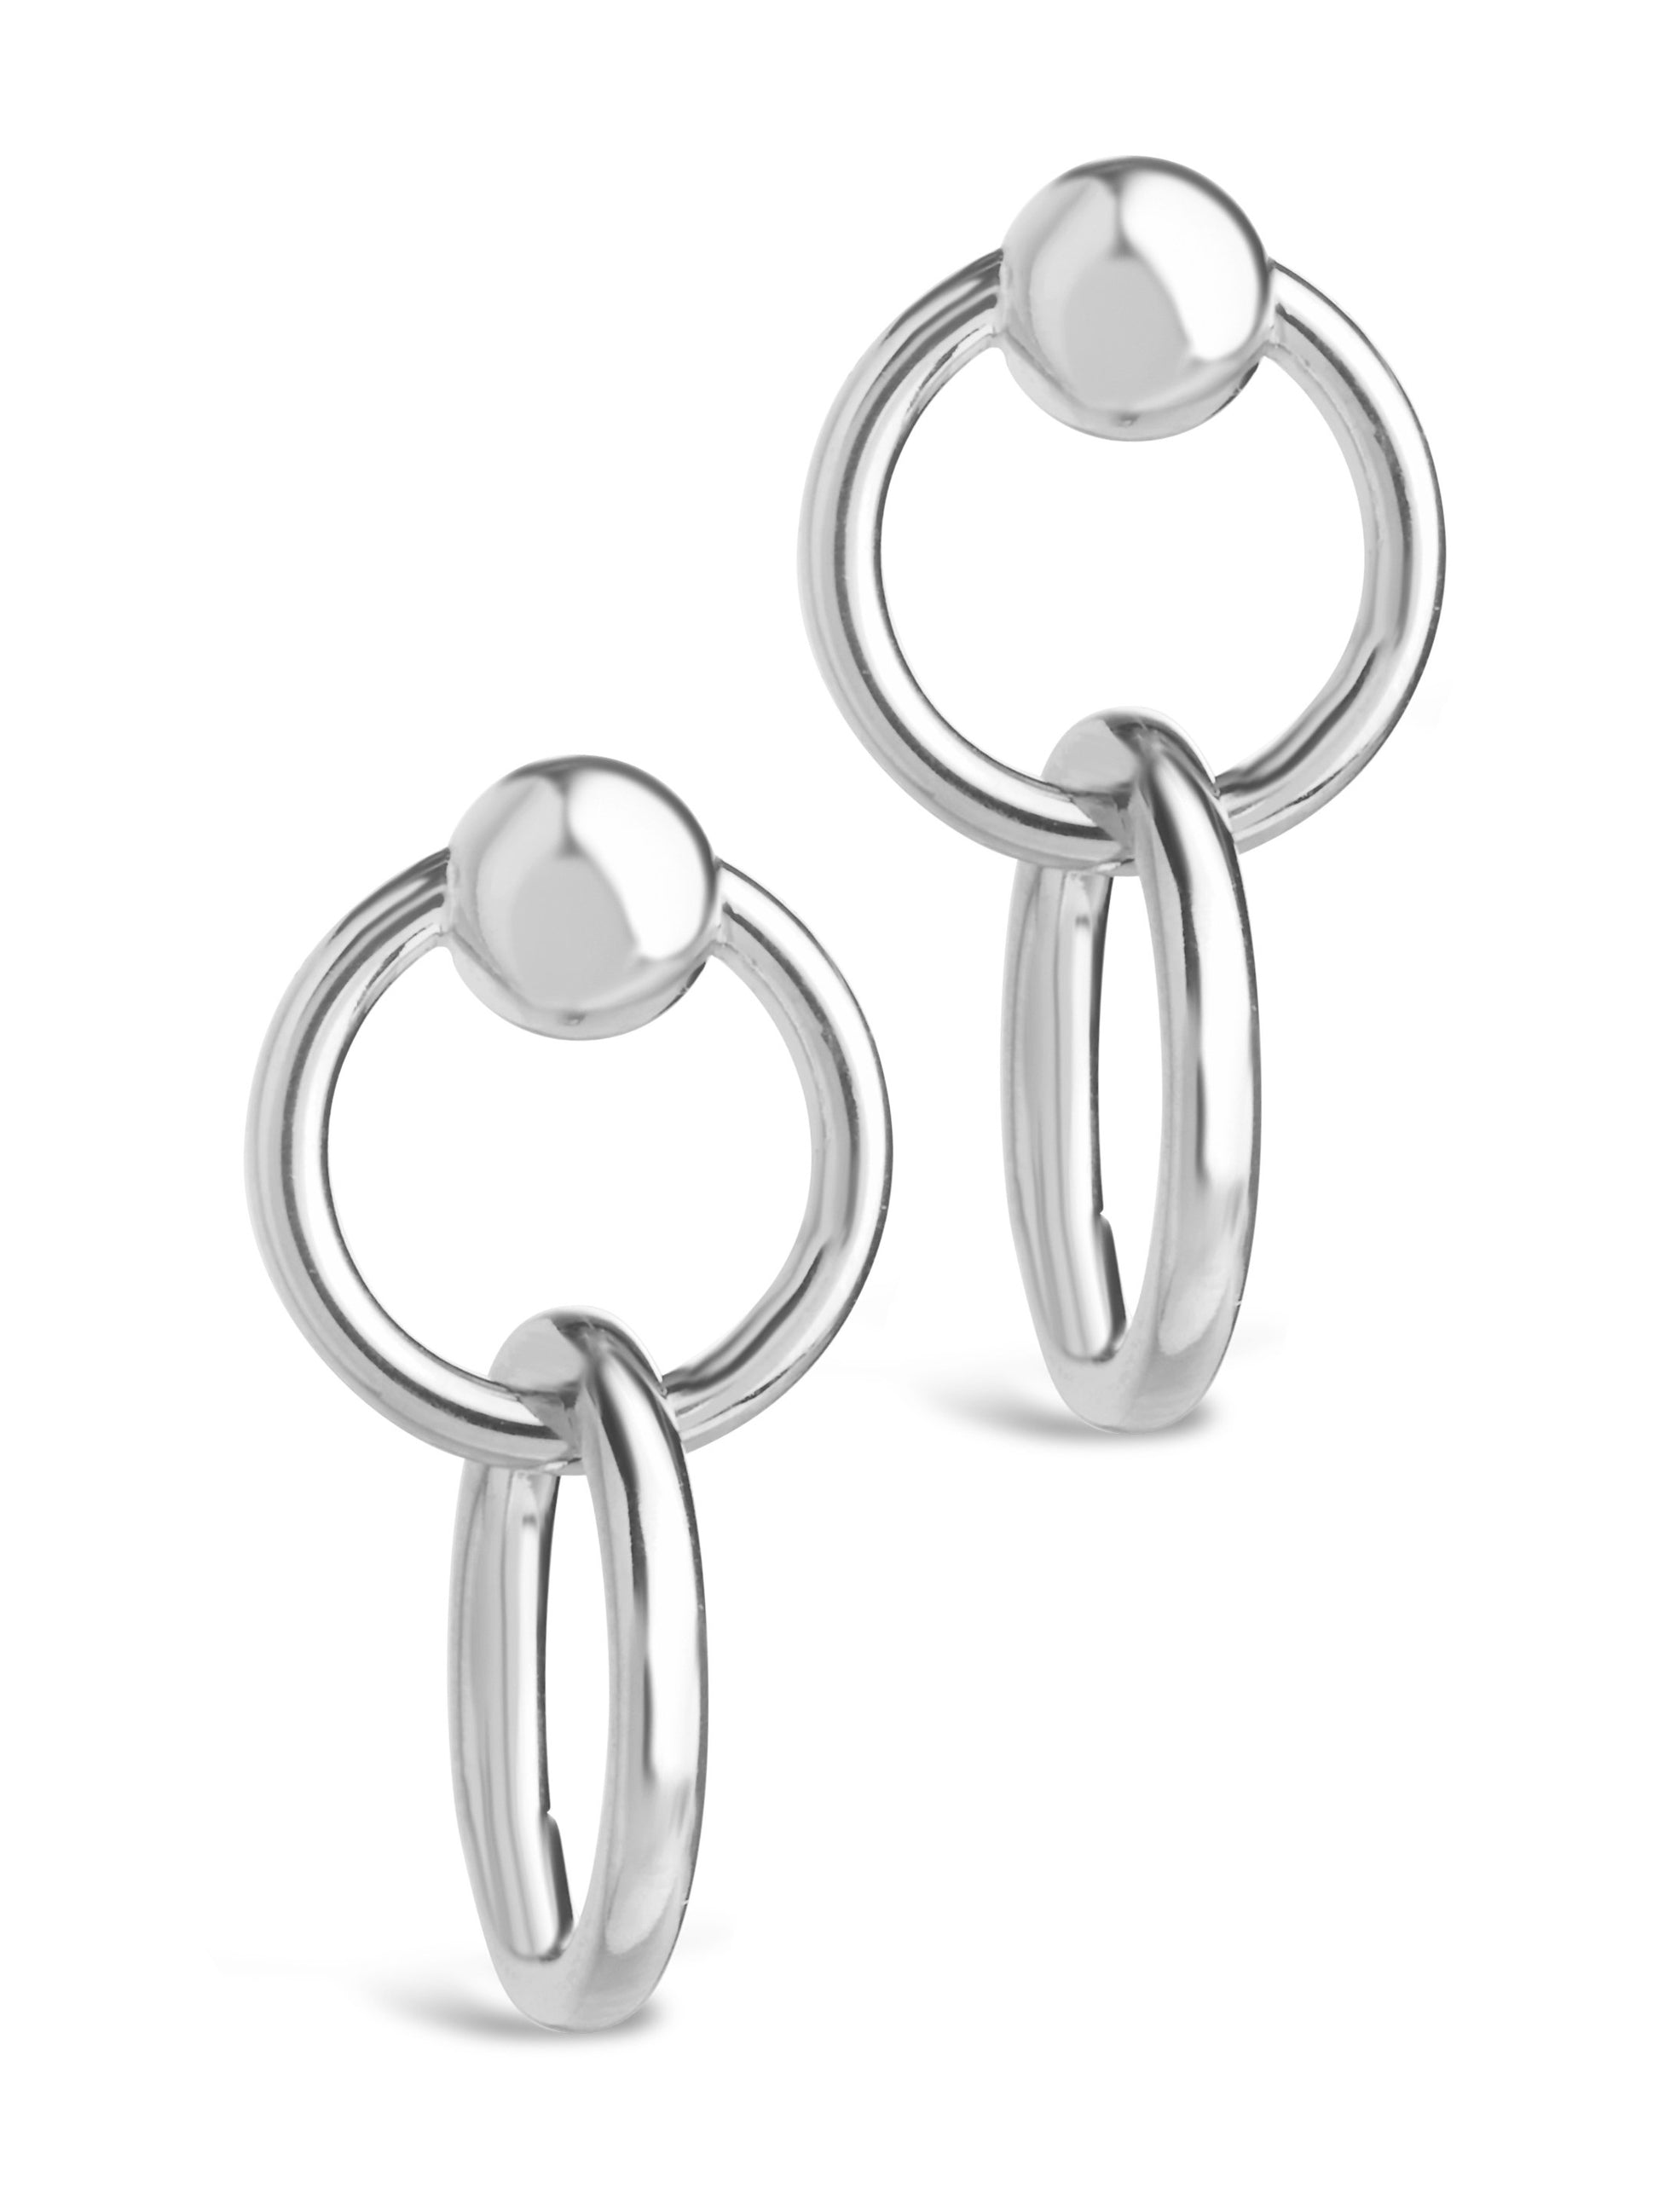 Sterling silver Polished Interlocking Circle Drop Earrings Earring Sterling Forever Silver 